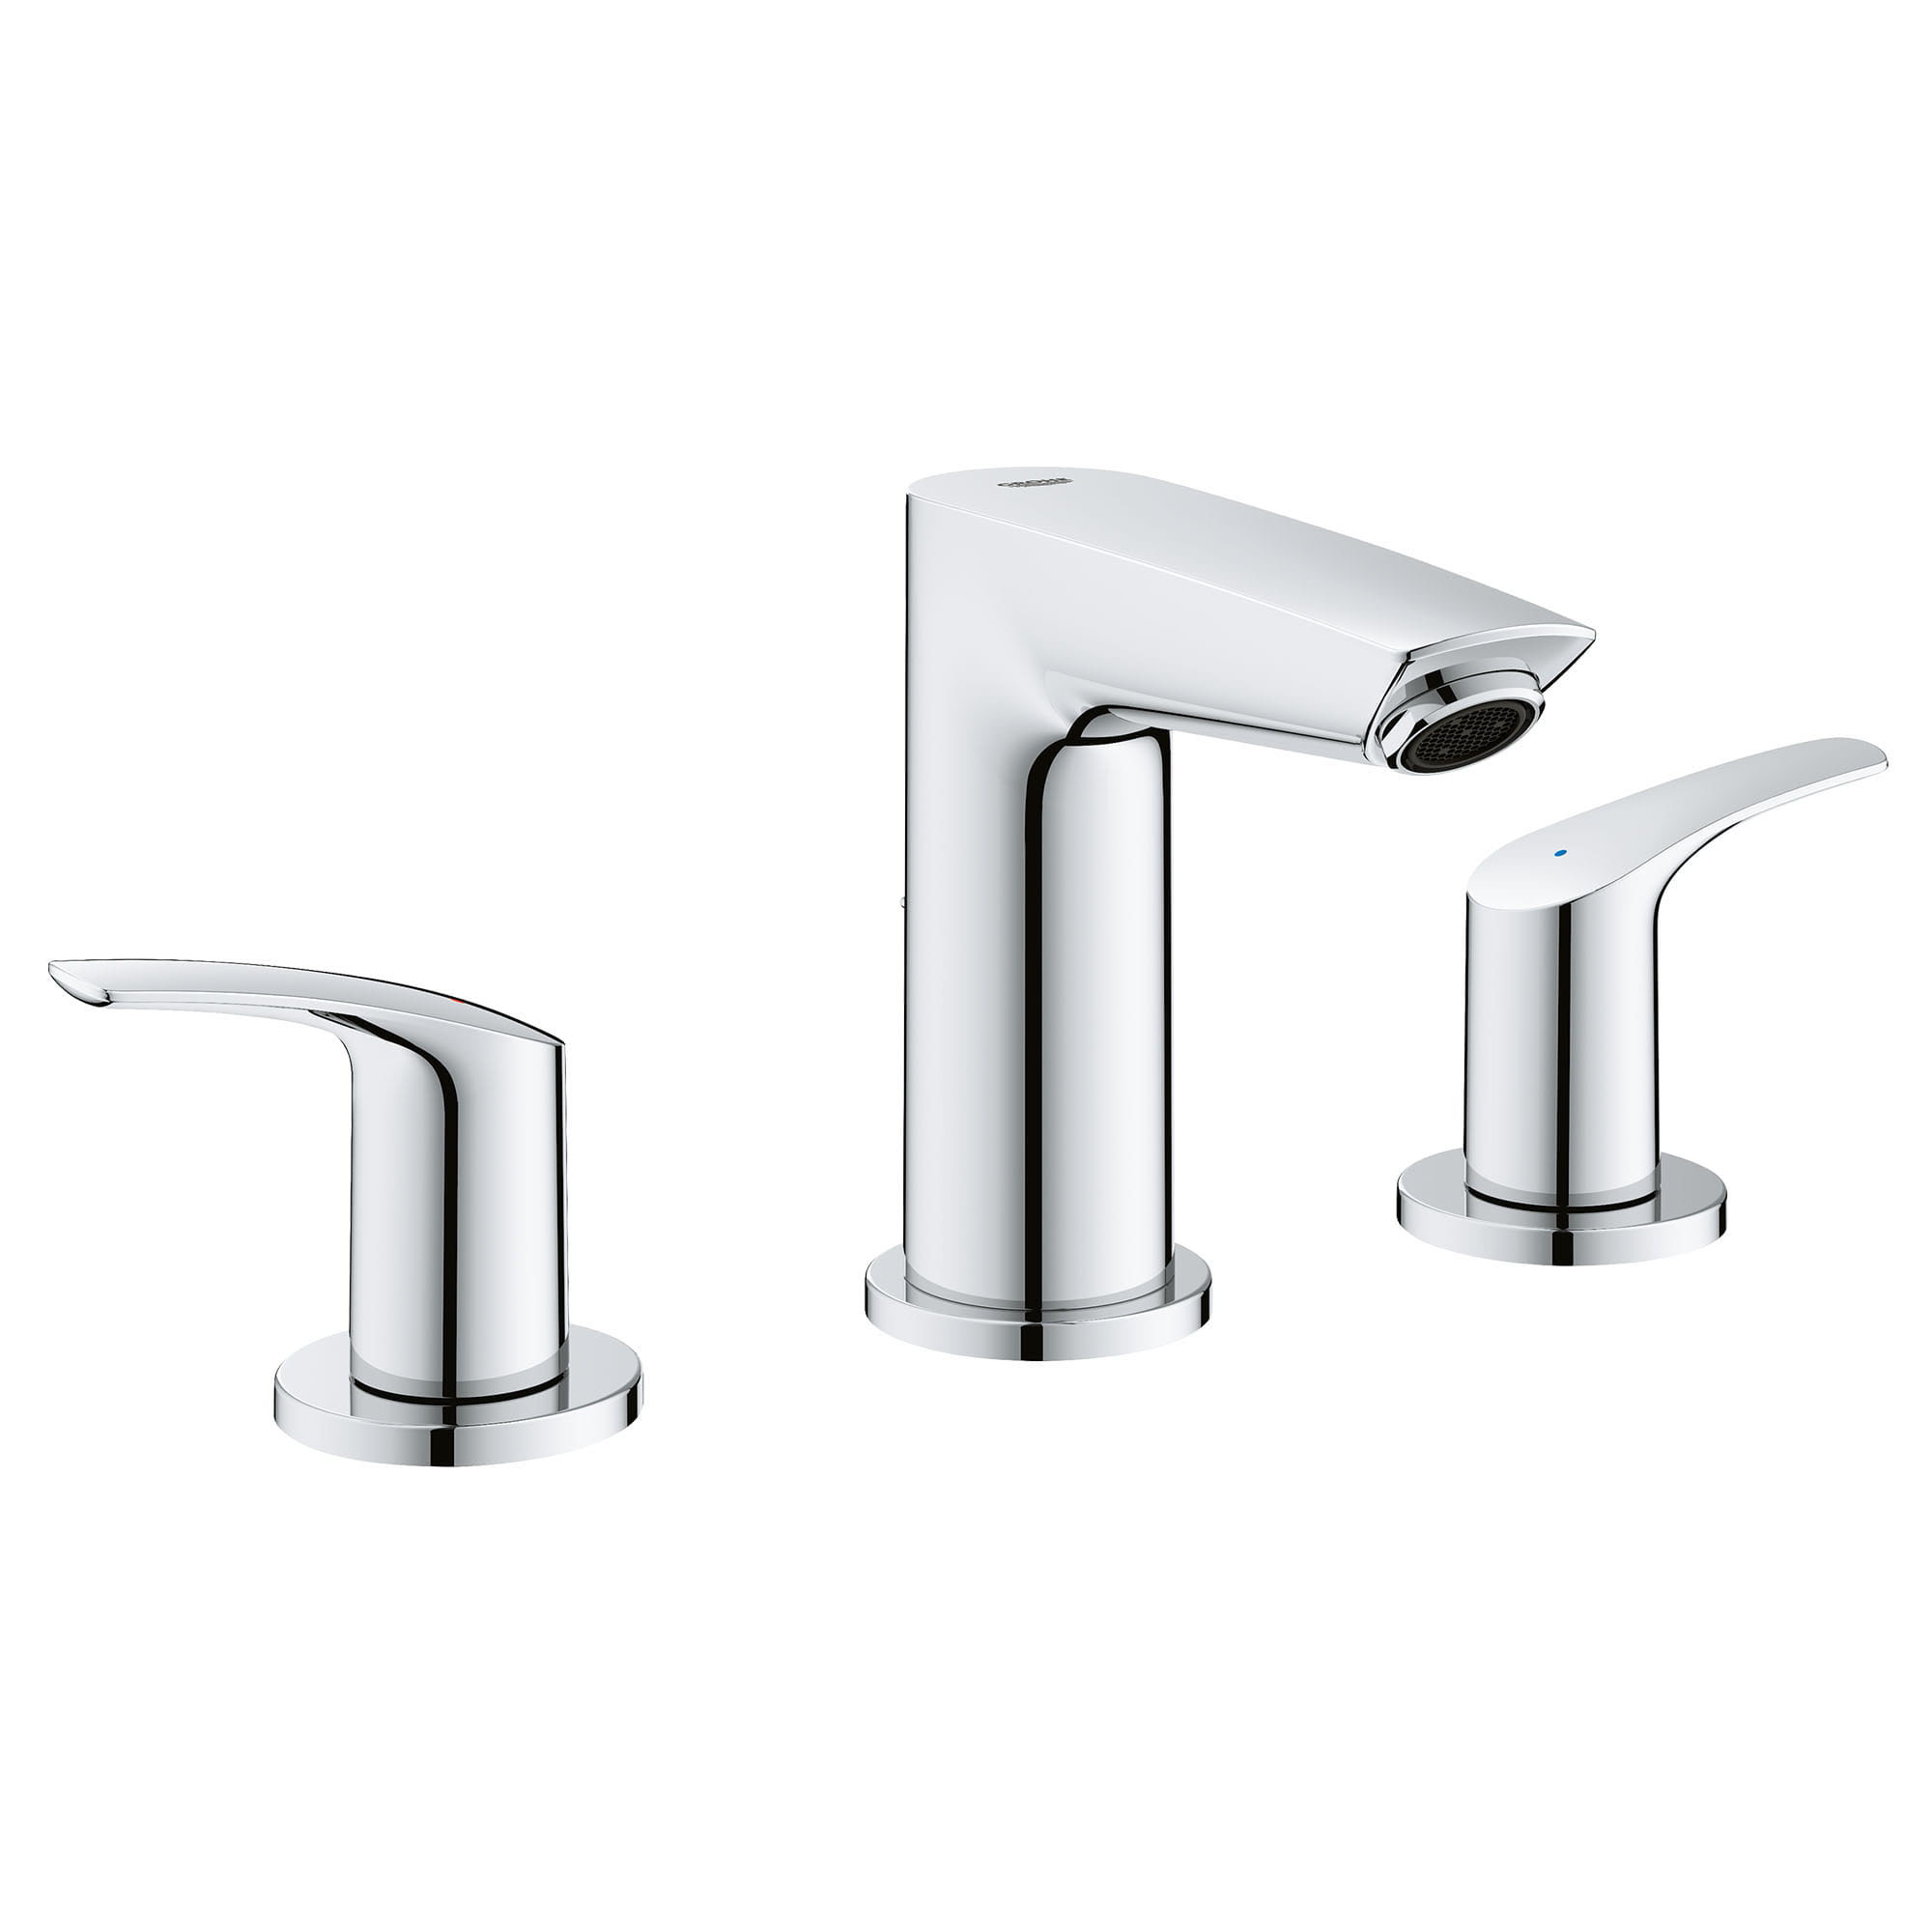 Eurosmart Widespread S-Size Lav Faucet in Chrome, 1.2 gpm